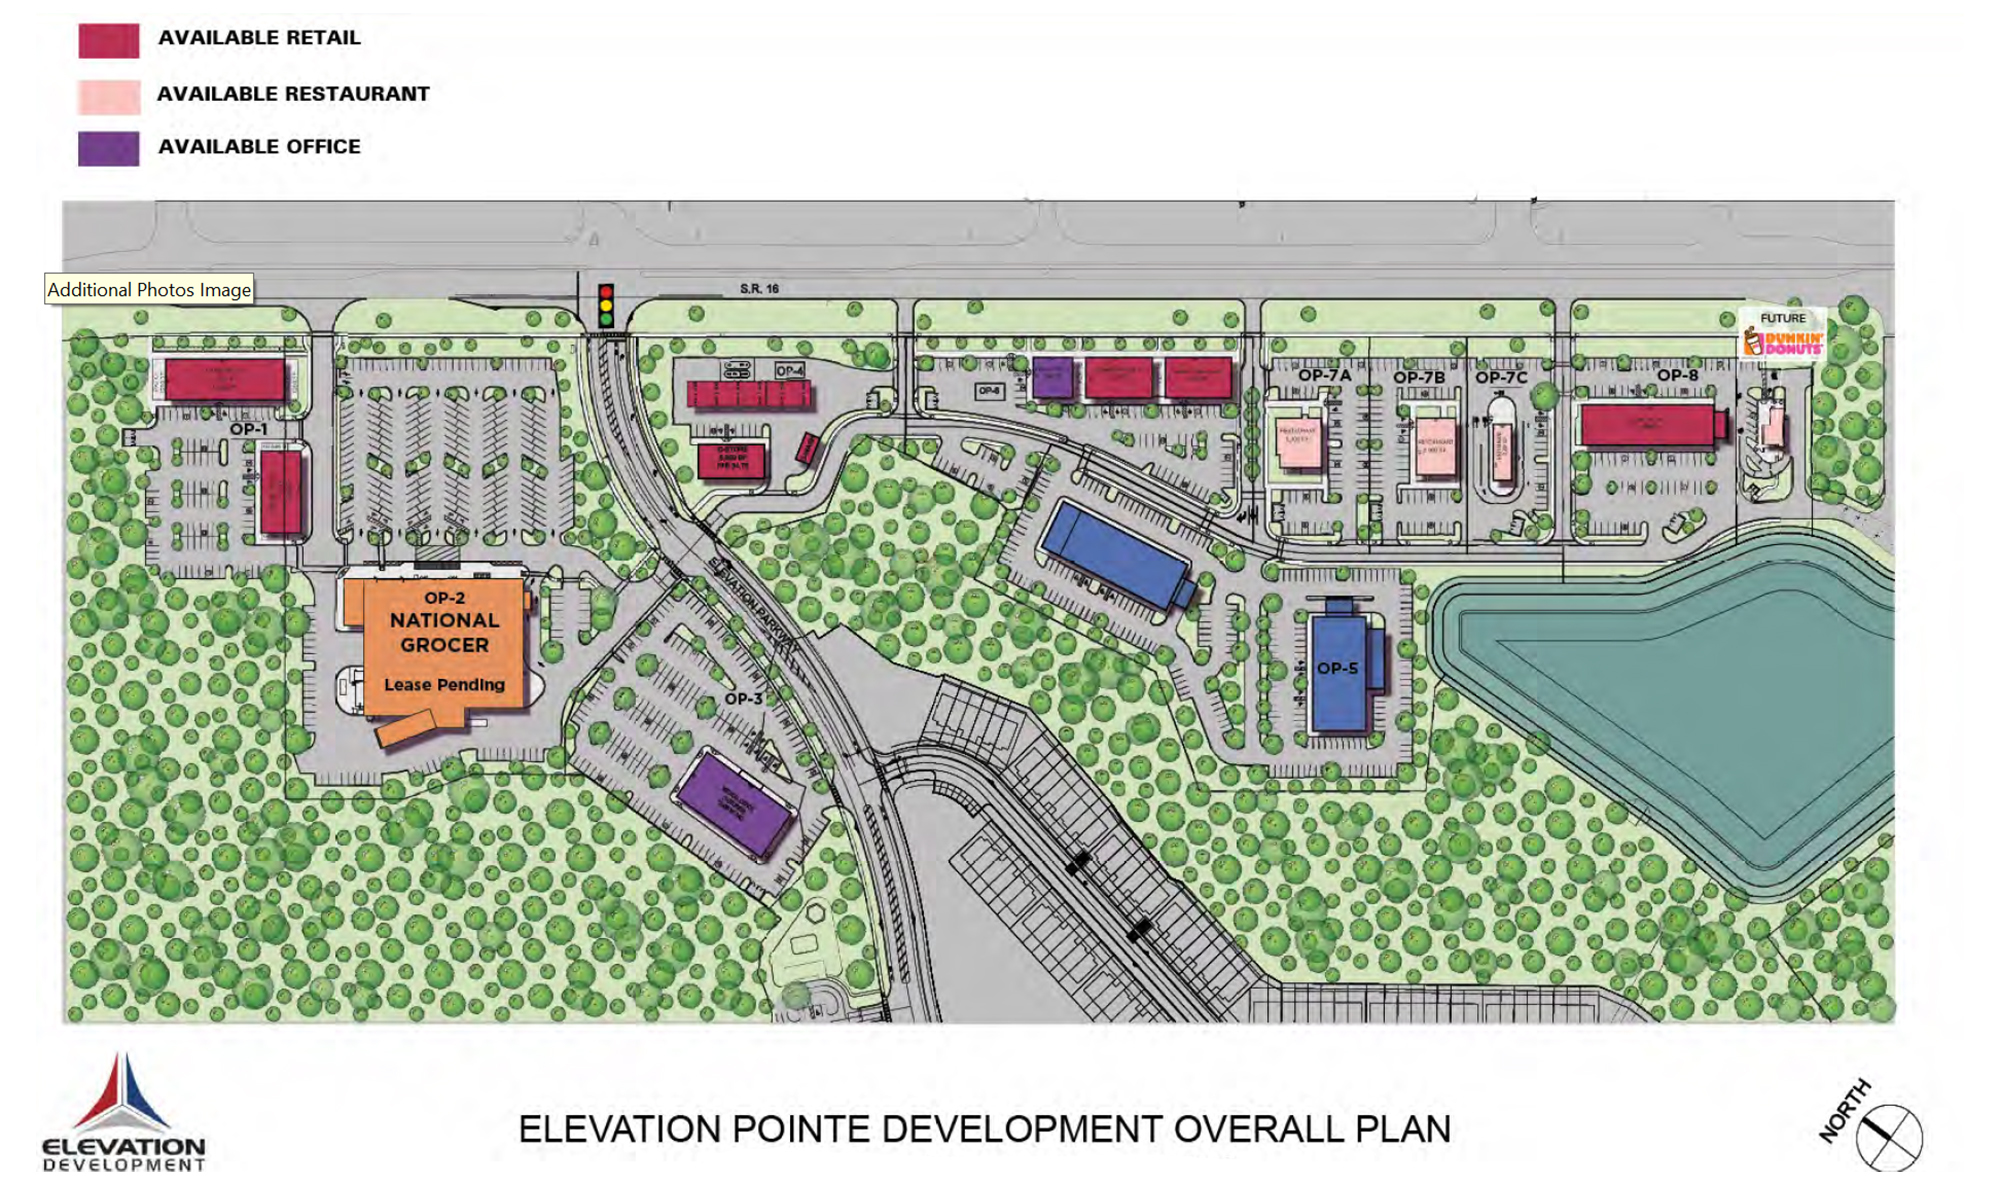 The development plan for Elevation Pointe.